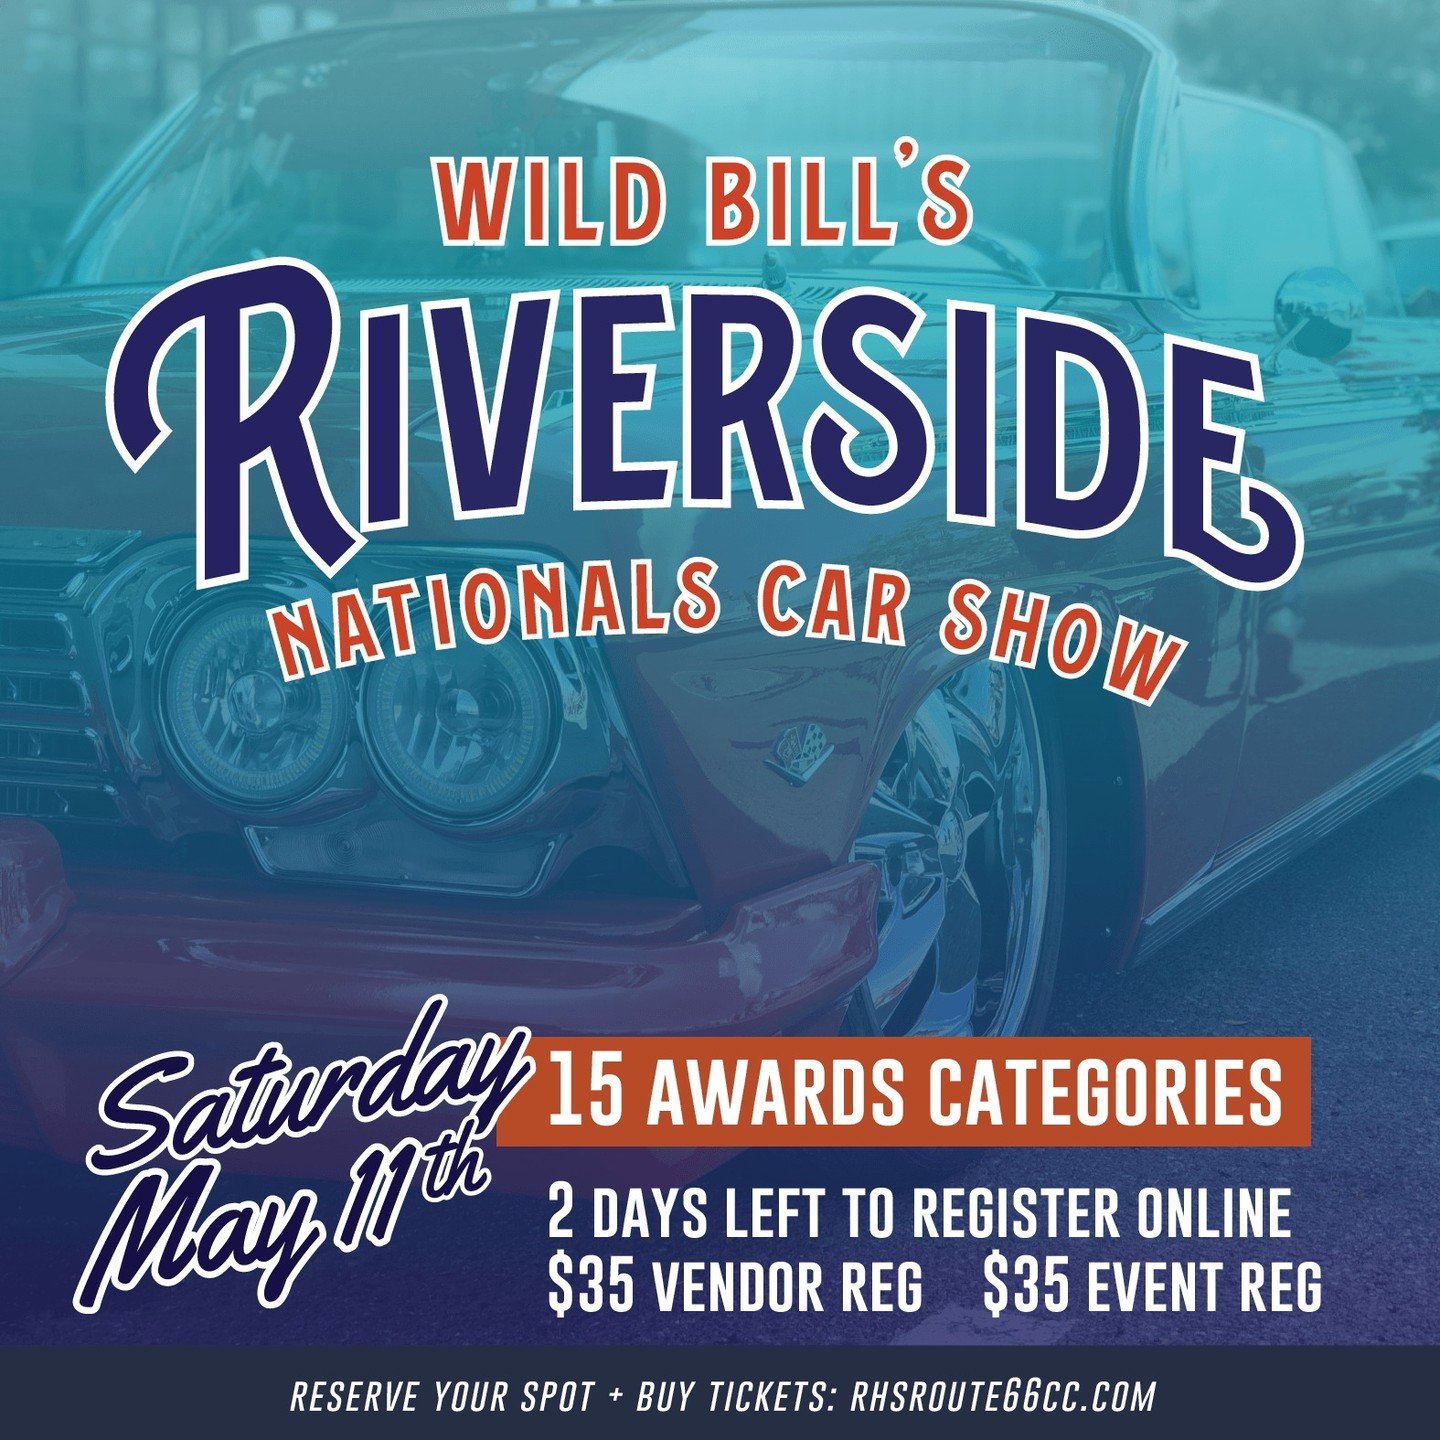 ⏰ Two Days Left to Register Online for the Car Show. 🏆 Custom Trophies in 15 Award Categories.

RHS Route 66 Car Club&rsquo;s Hall of Fame will honor the families of Terry &ldquo;Kiwi&rdquo; Stephens, Tom McWeeney, and Steve Vandeman.

Event Registr